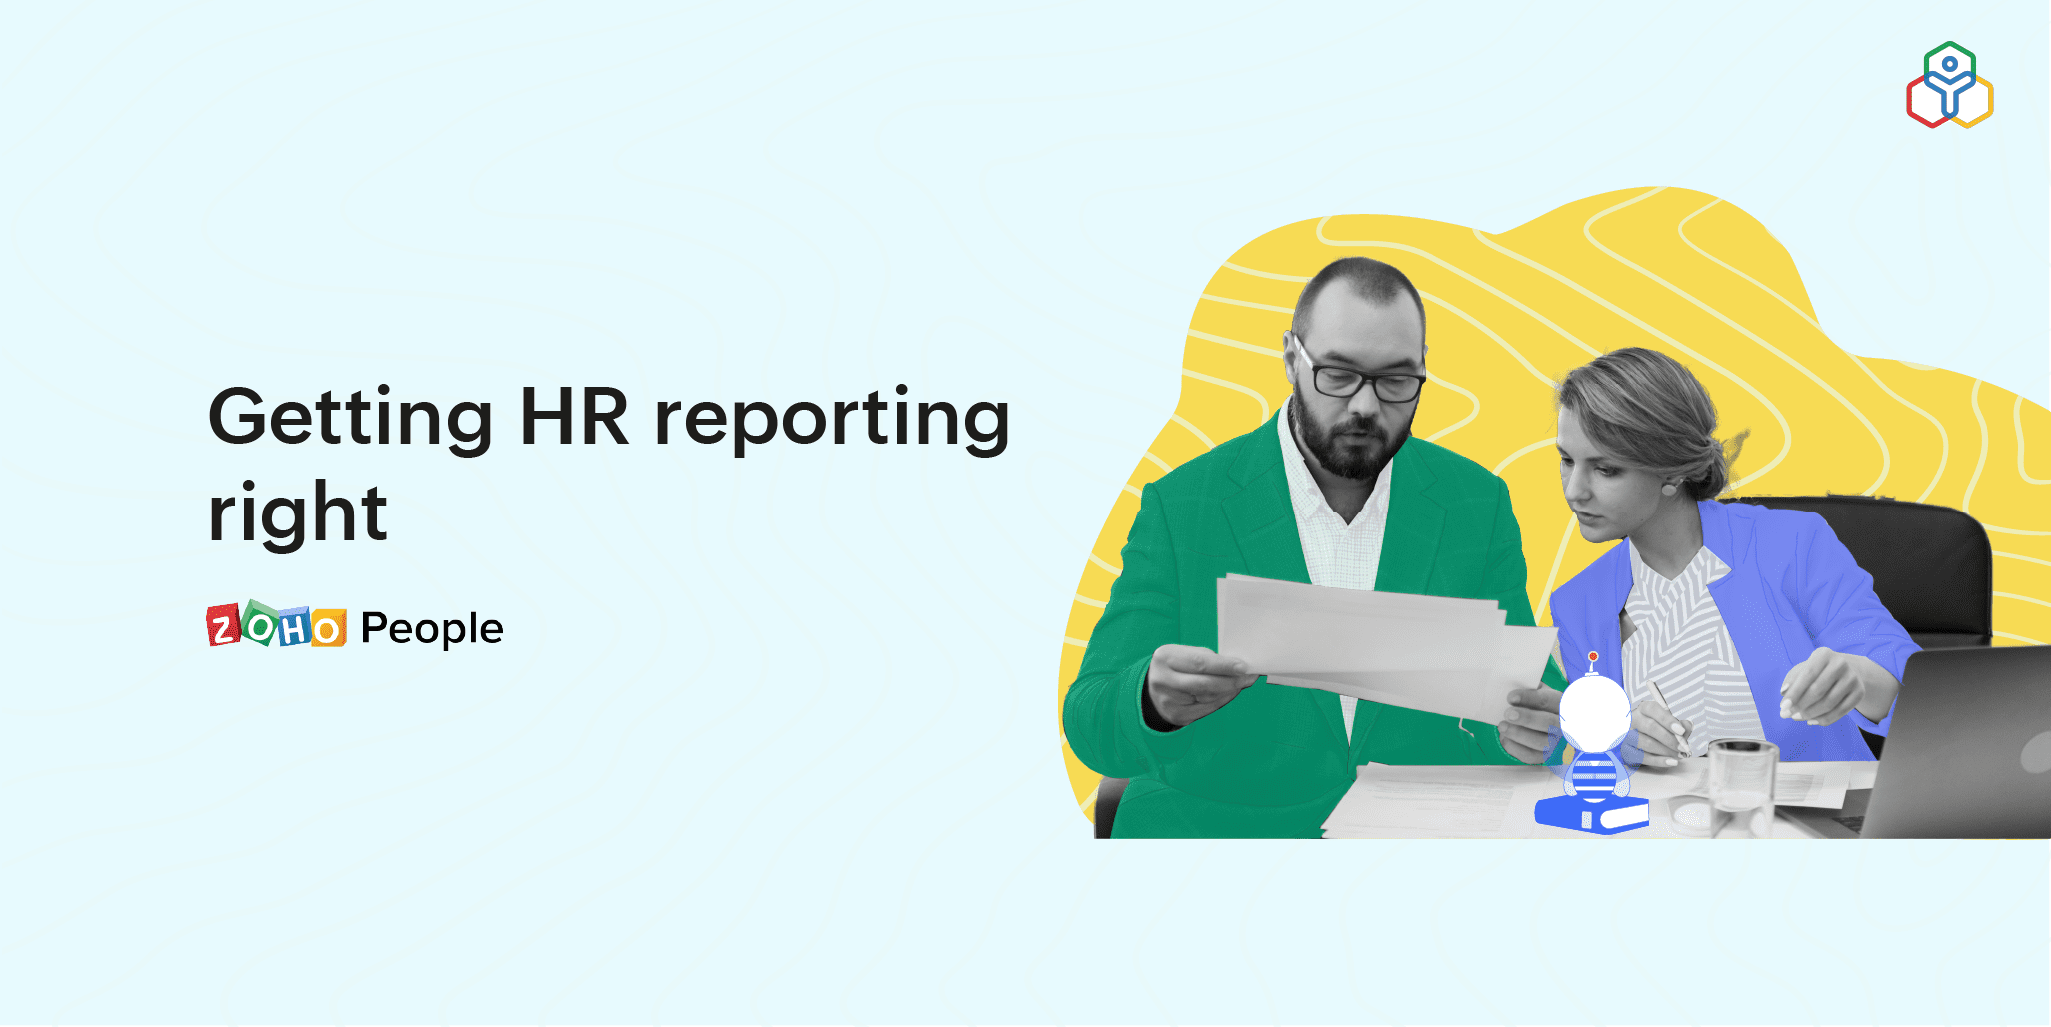 A step-by-step guide to getting HR reporting right